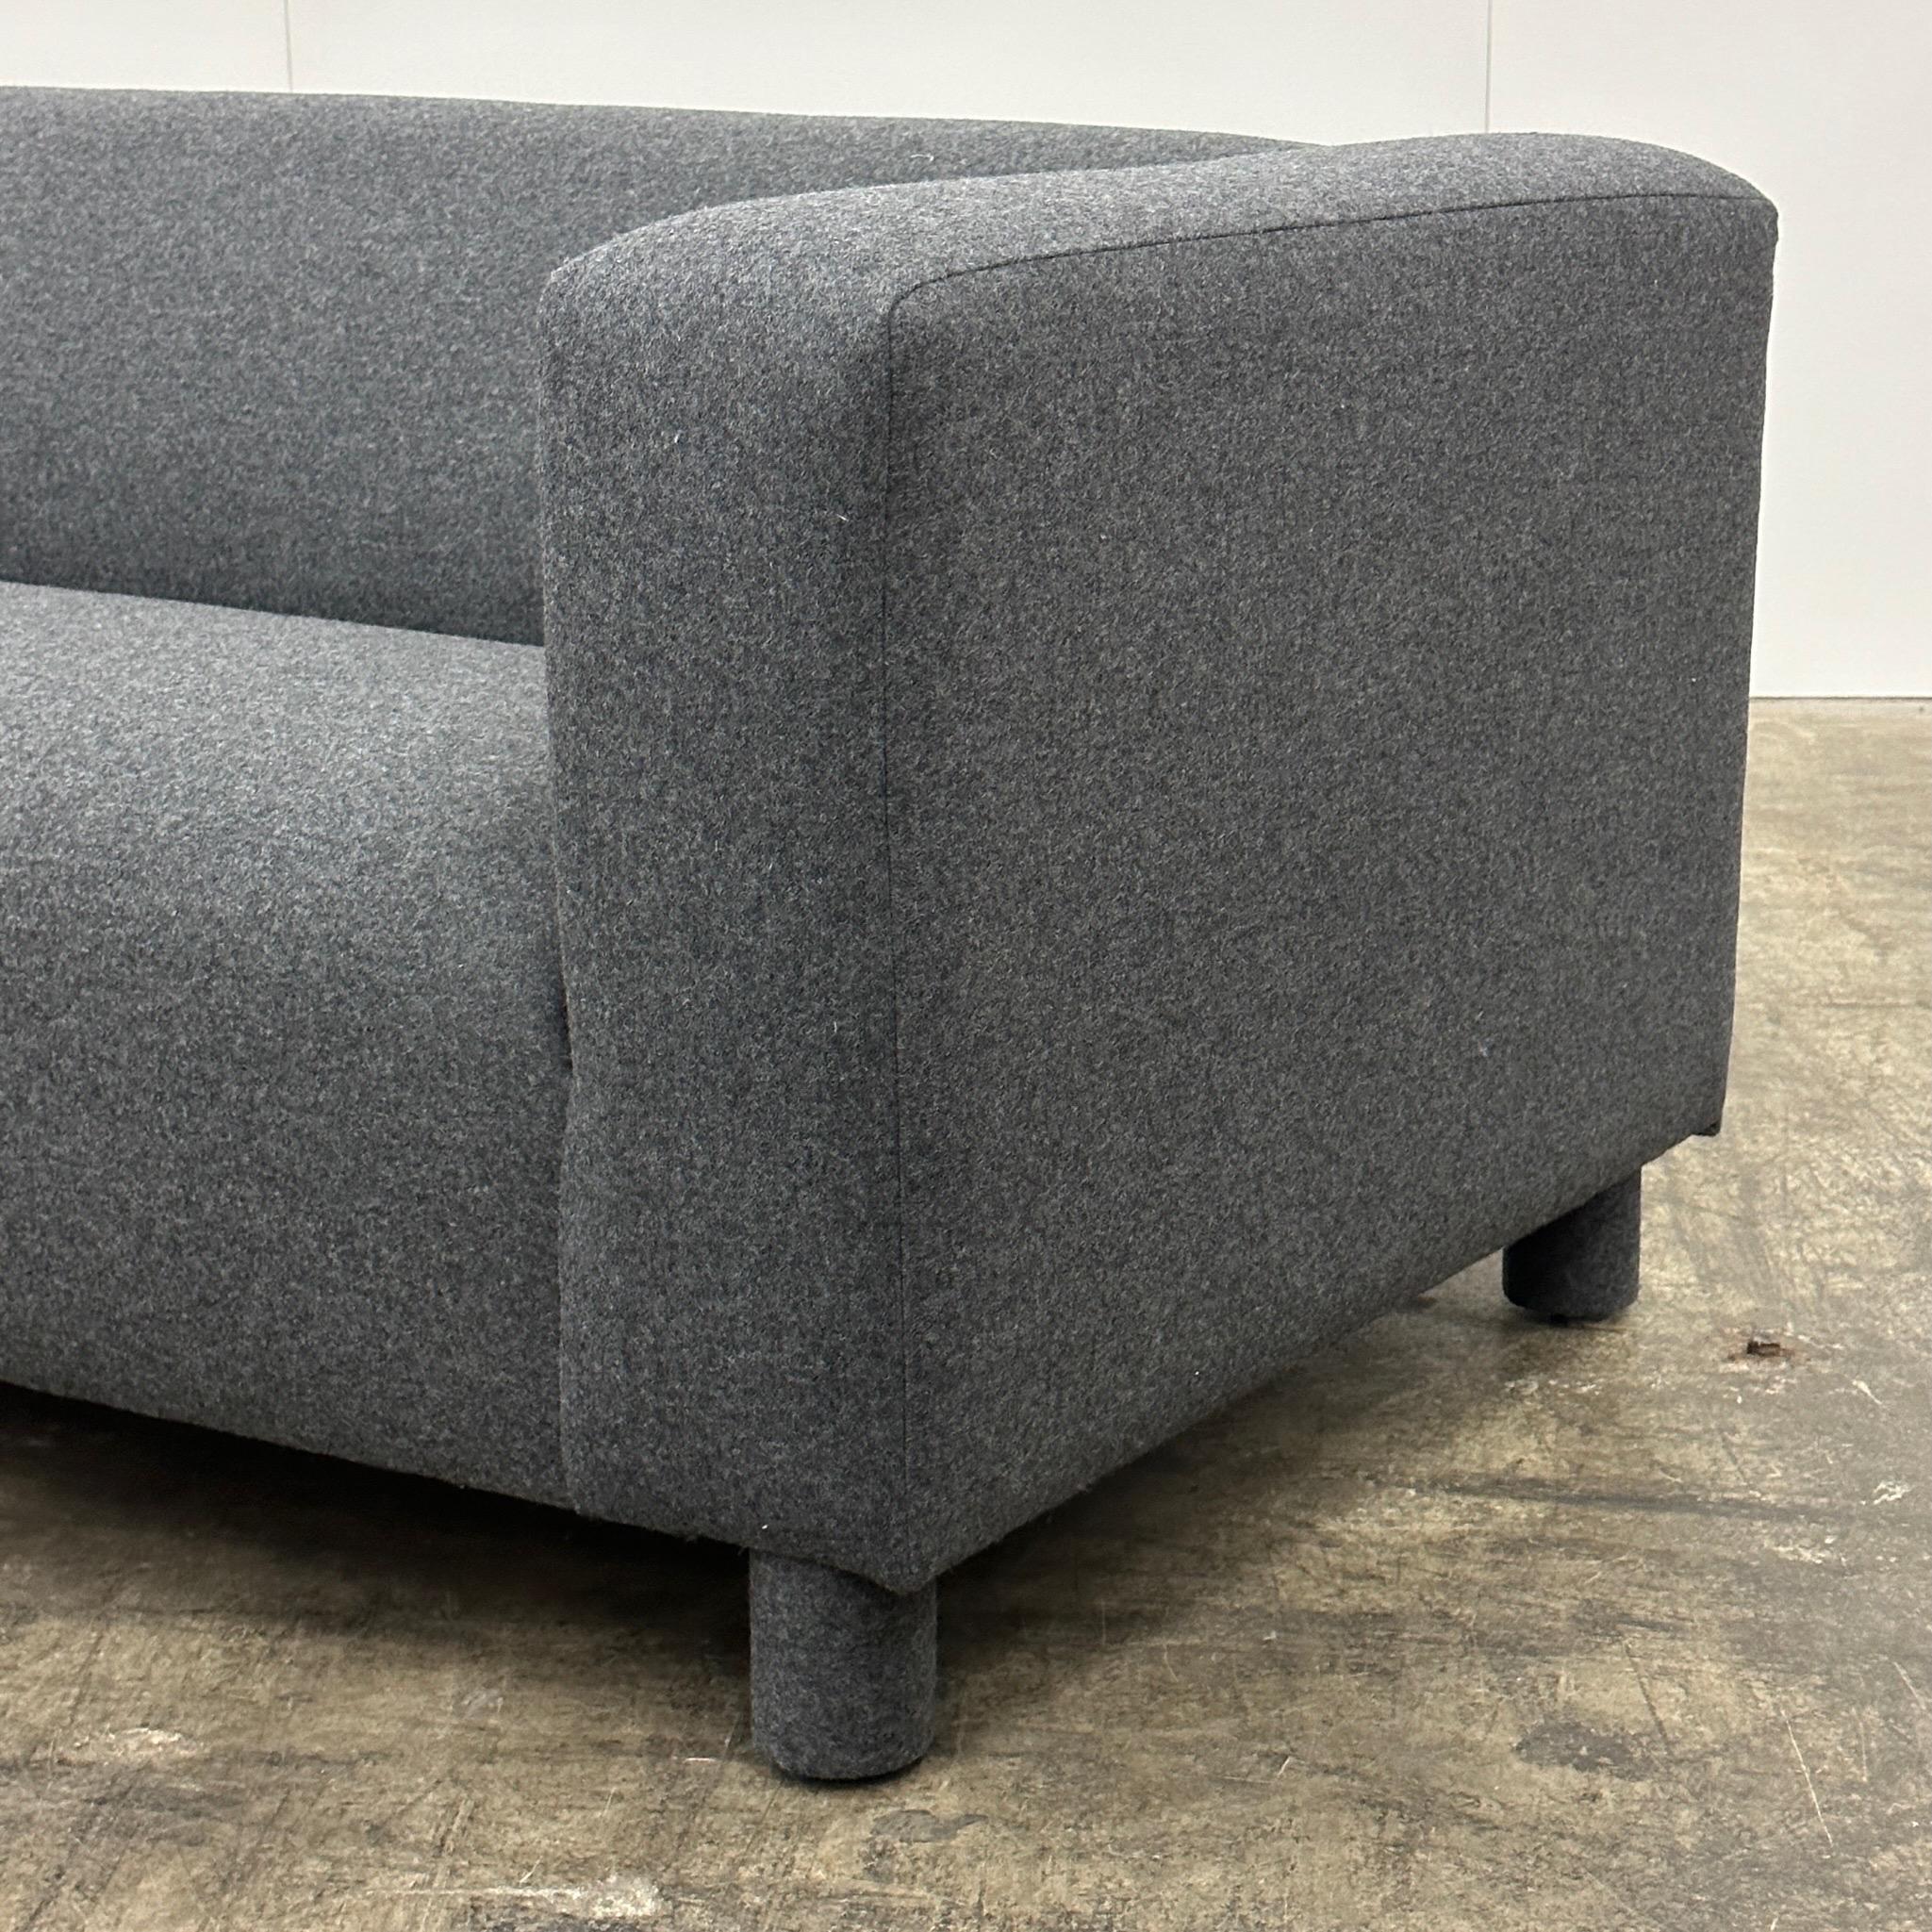 c. 1990s. Reupholstered in Camira Synergy charcoal wool fabric. Chunky legs covered as well.